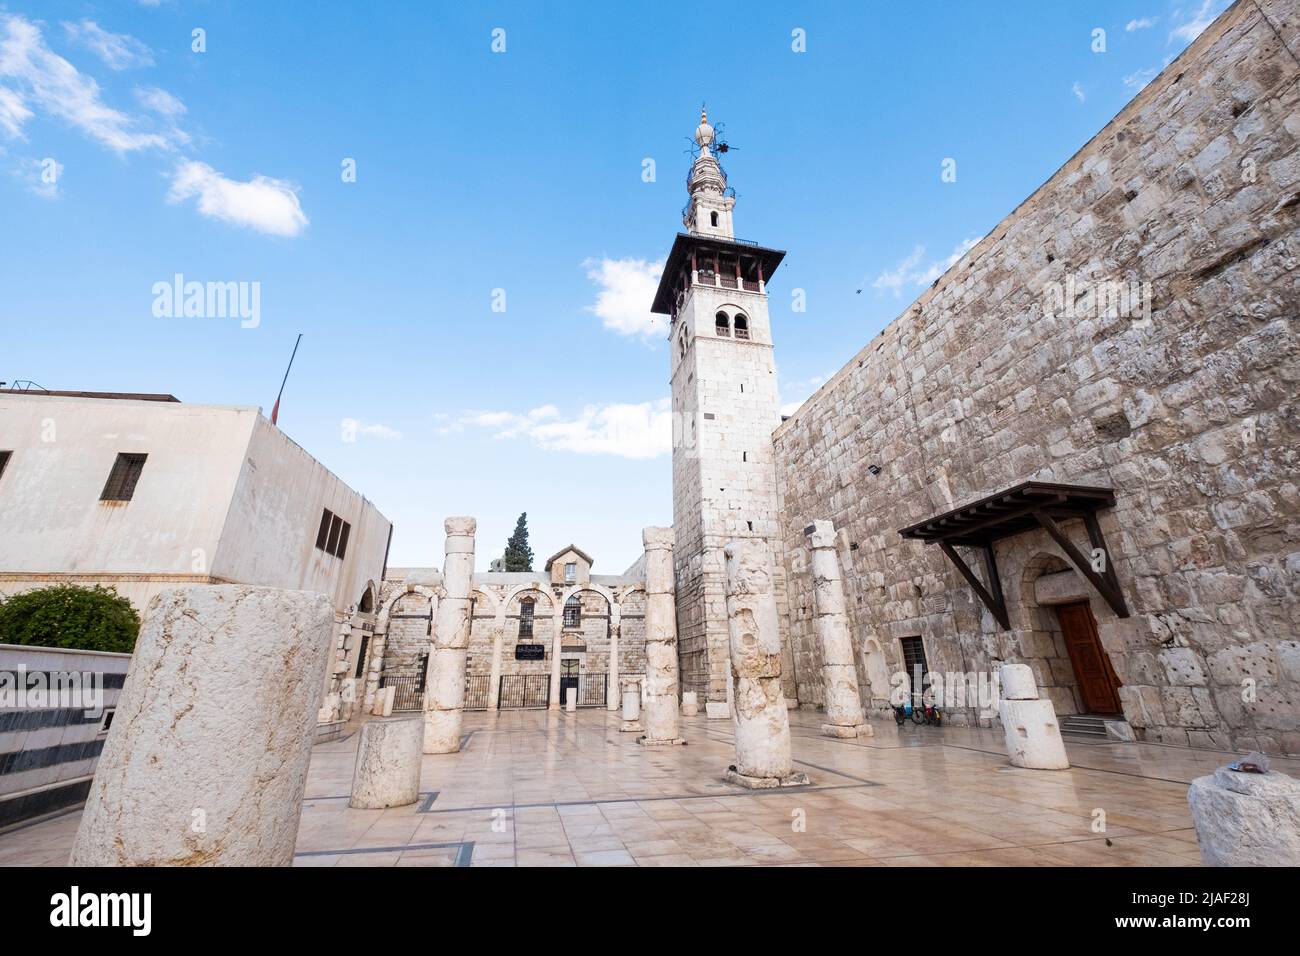 Damascus, Syria - May, 2022: Exterior of the Umayyad Mosque and Mausoleum of Saladin in Damascus Stock Photo